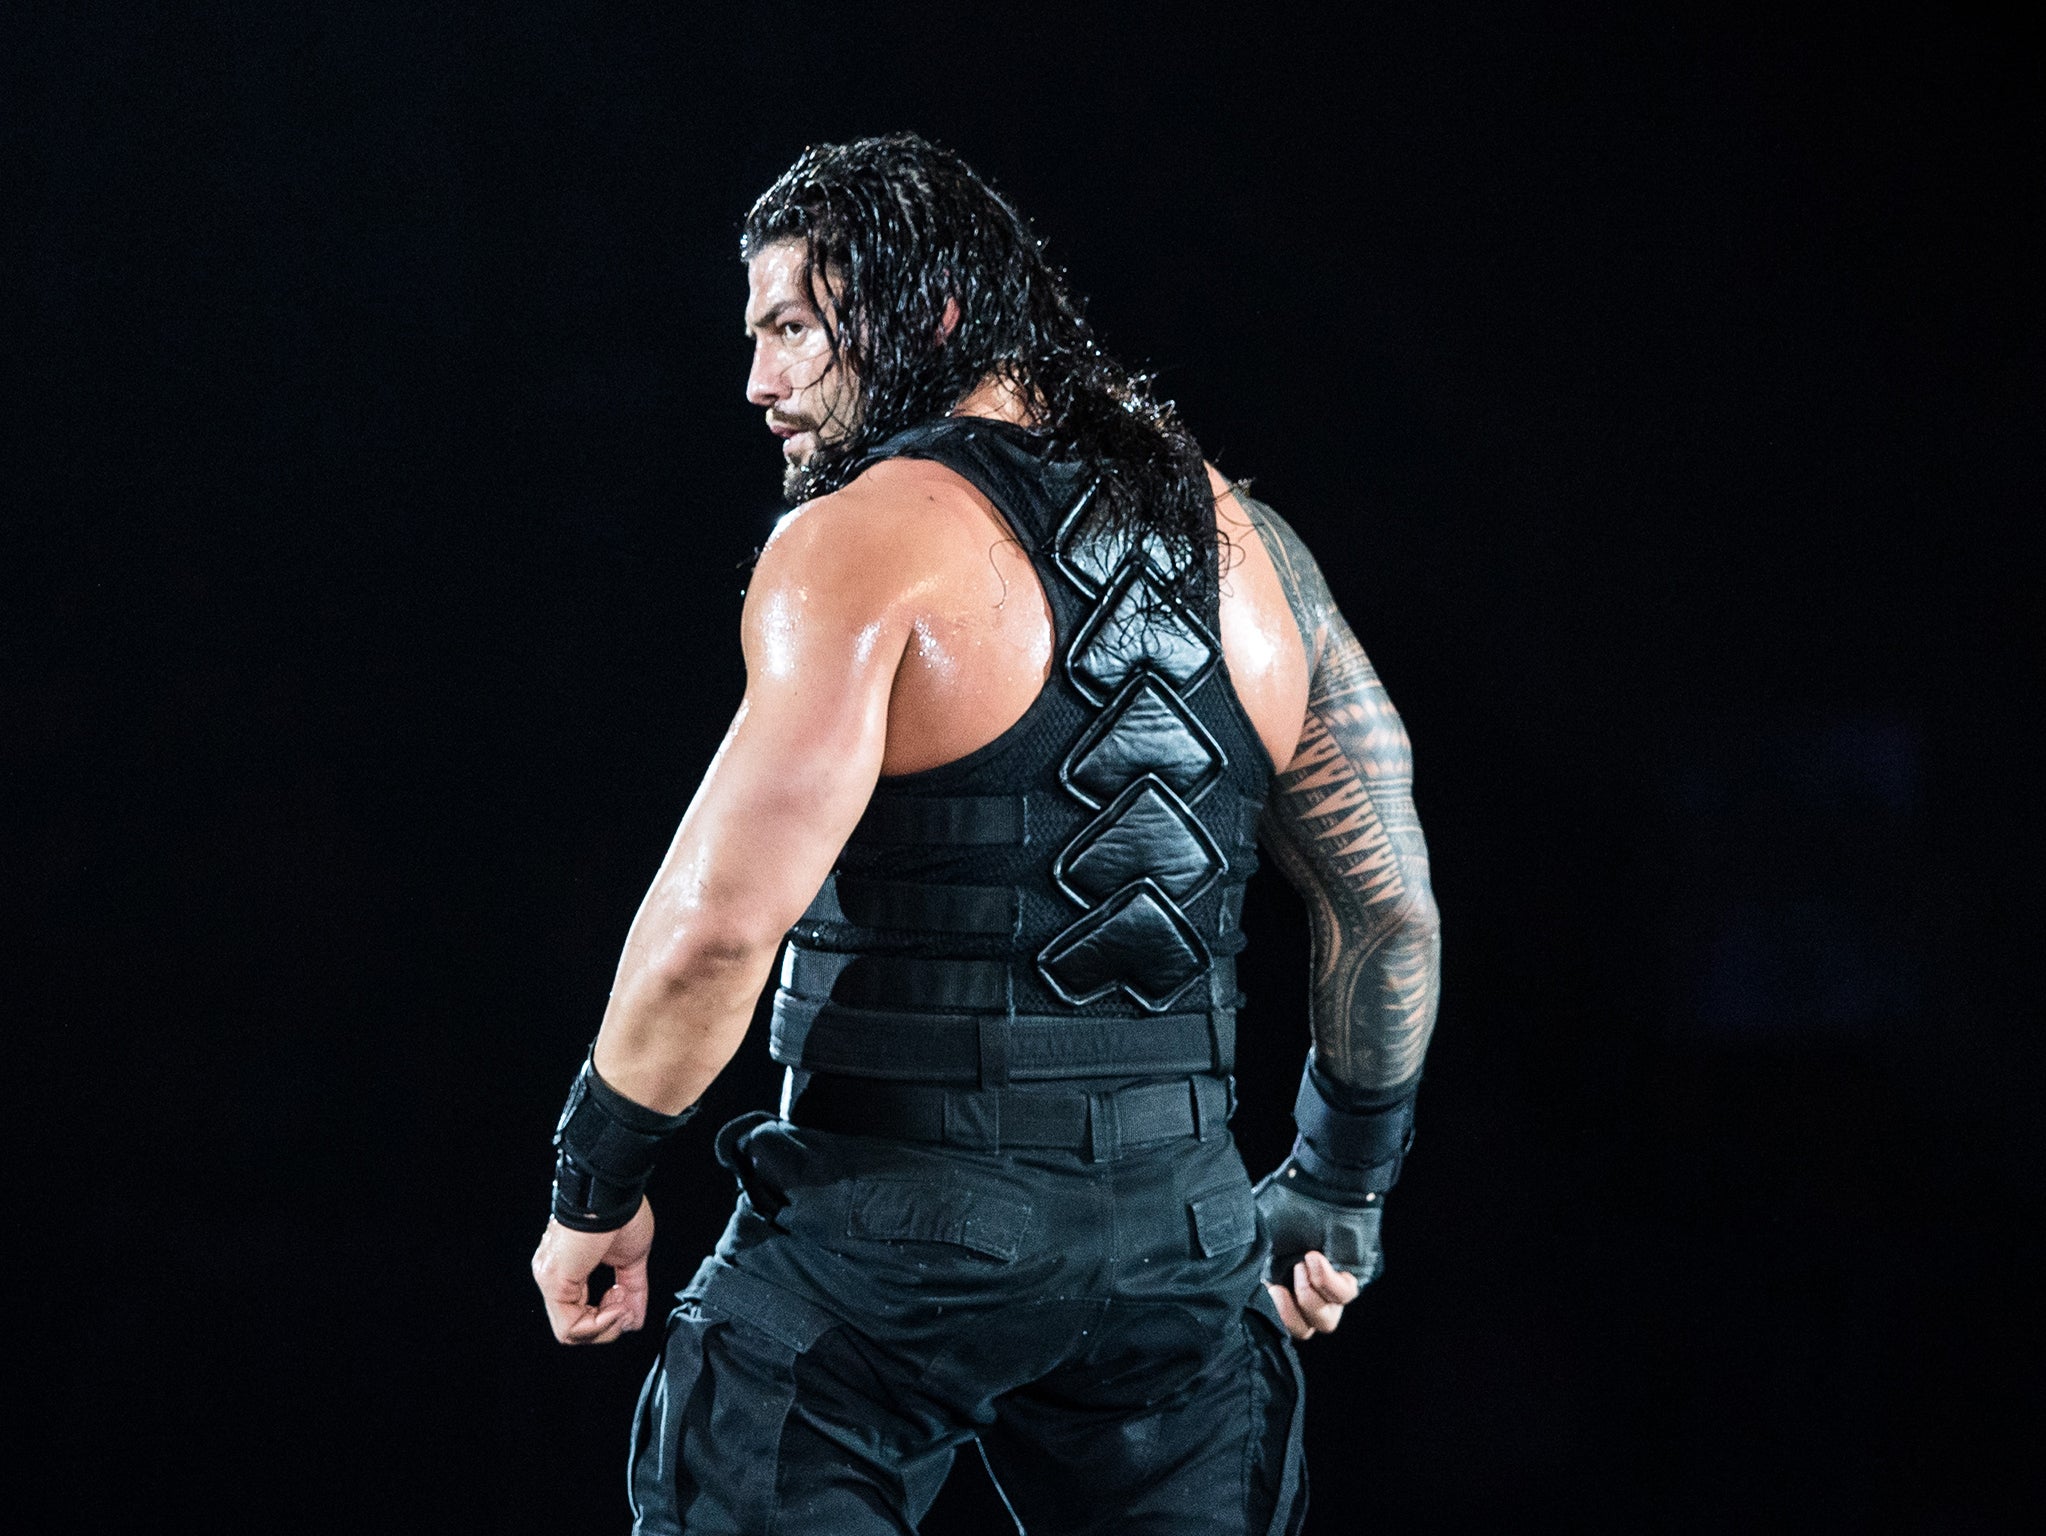 Roman Reigns lost his title